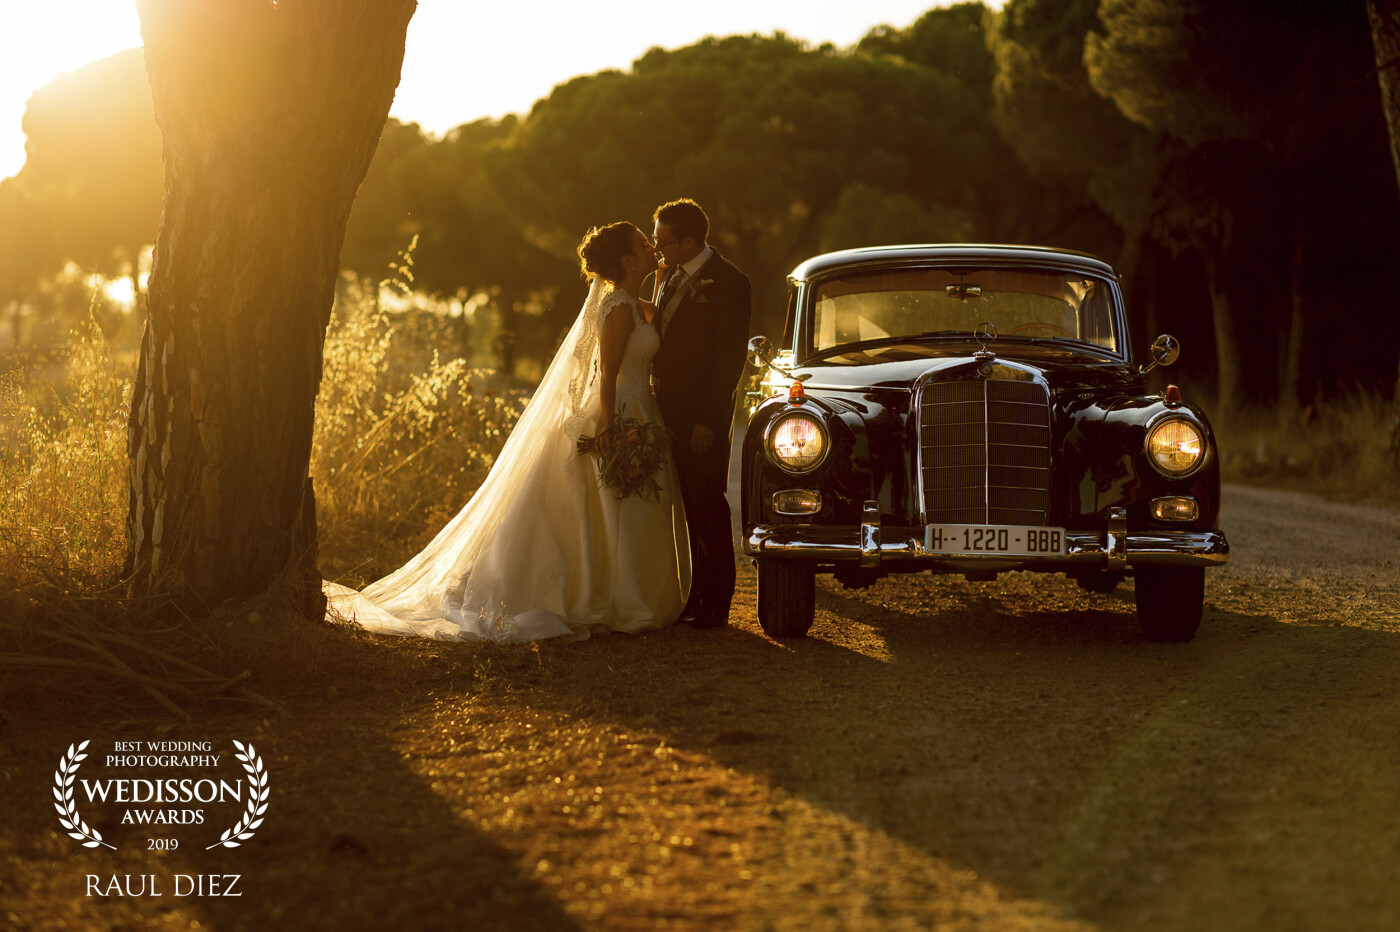 During a few minutes we had before the coctail, we found a wonderful light. <br />
We took full advantage of 10 minutes before sunset. <br />
A beautiful pine forest, the couple in love and the old car did the rest. <br />
The photo is taken in Simancas, a beautiful town very close to Valladolid, Spain. <br />
More photos in radiga.com